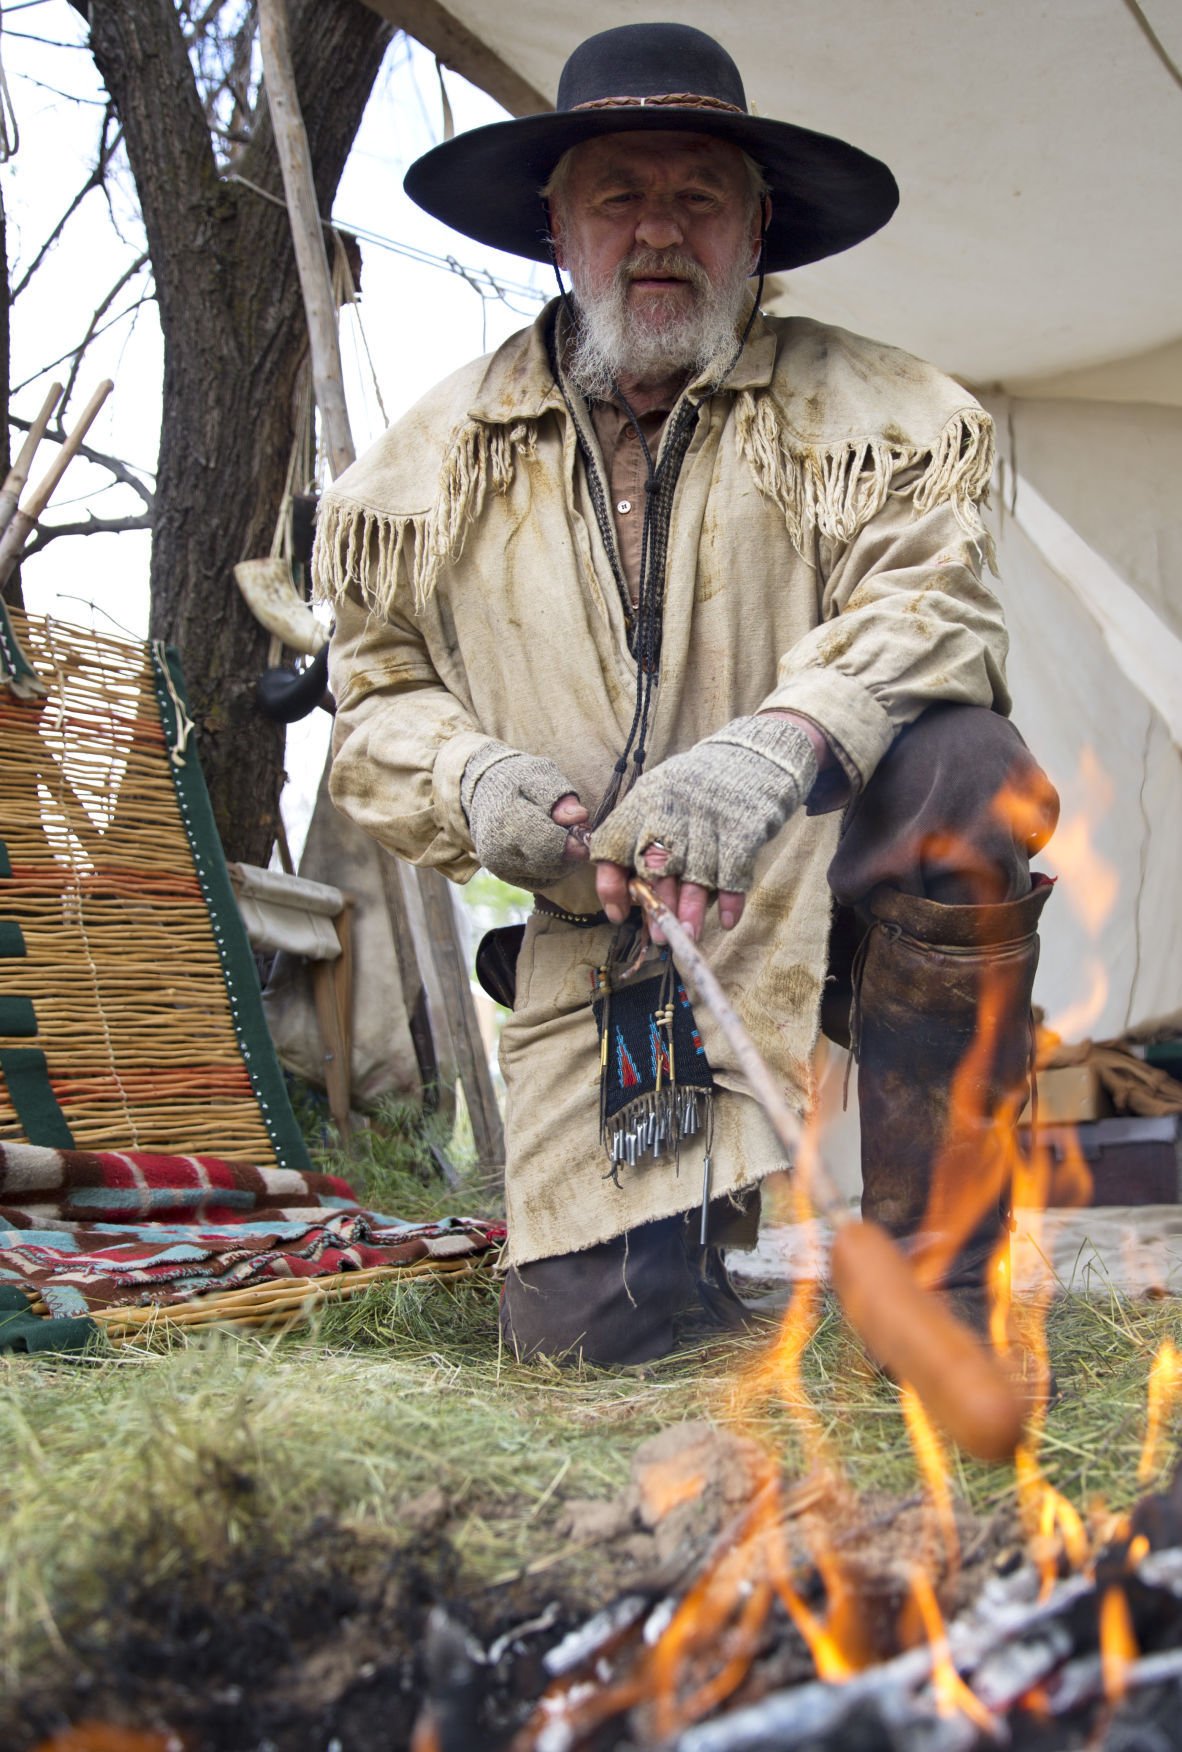 2019 Cache Valley Mountain Man Rendezvous American West Heritage Center